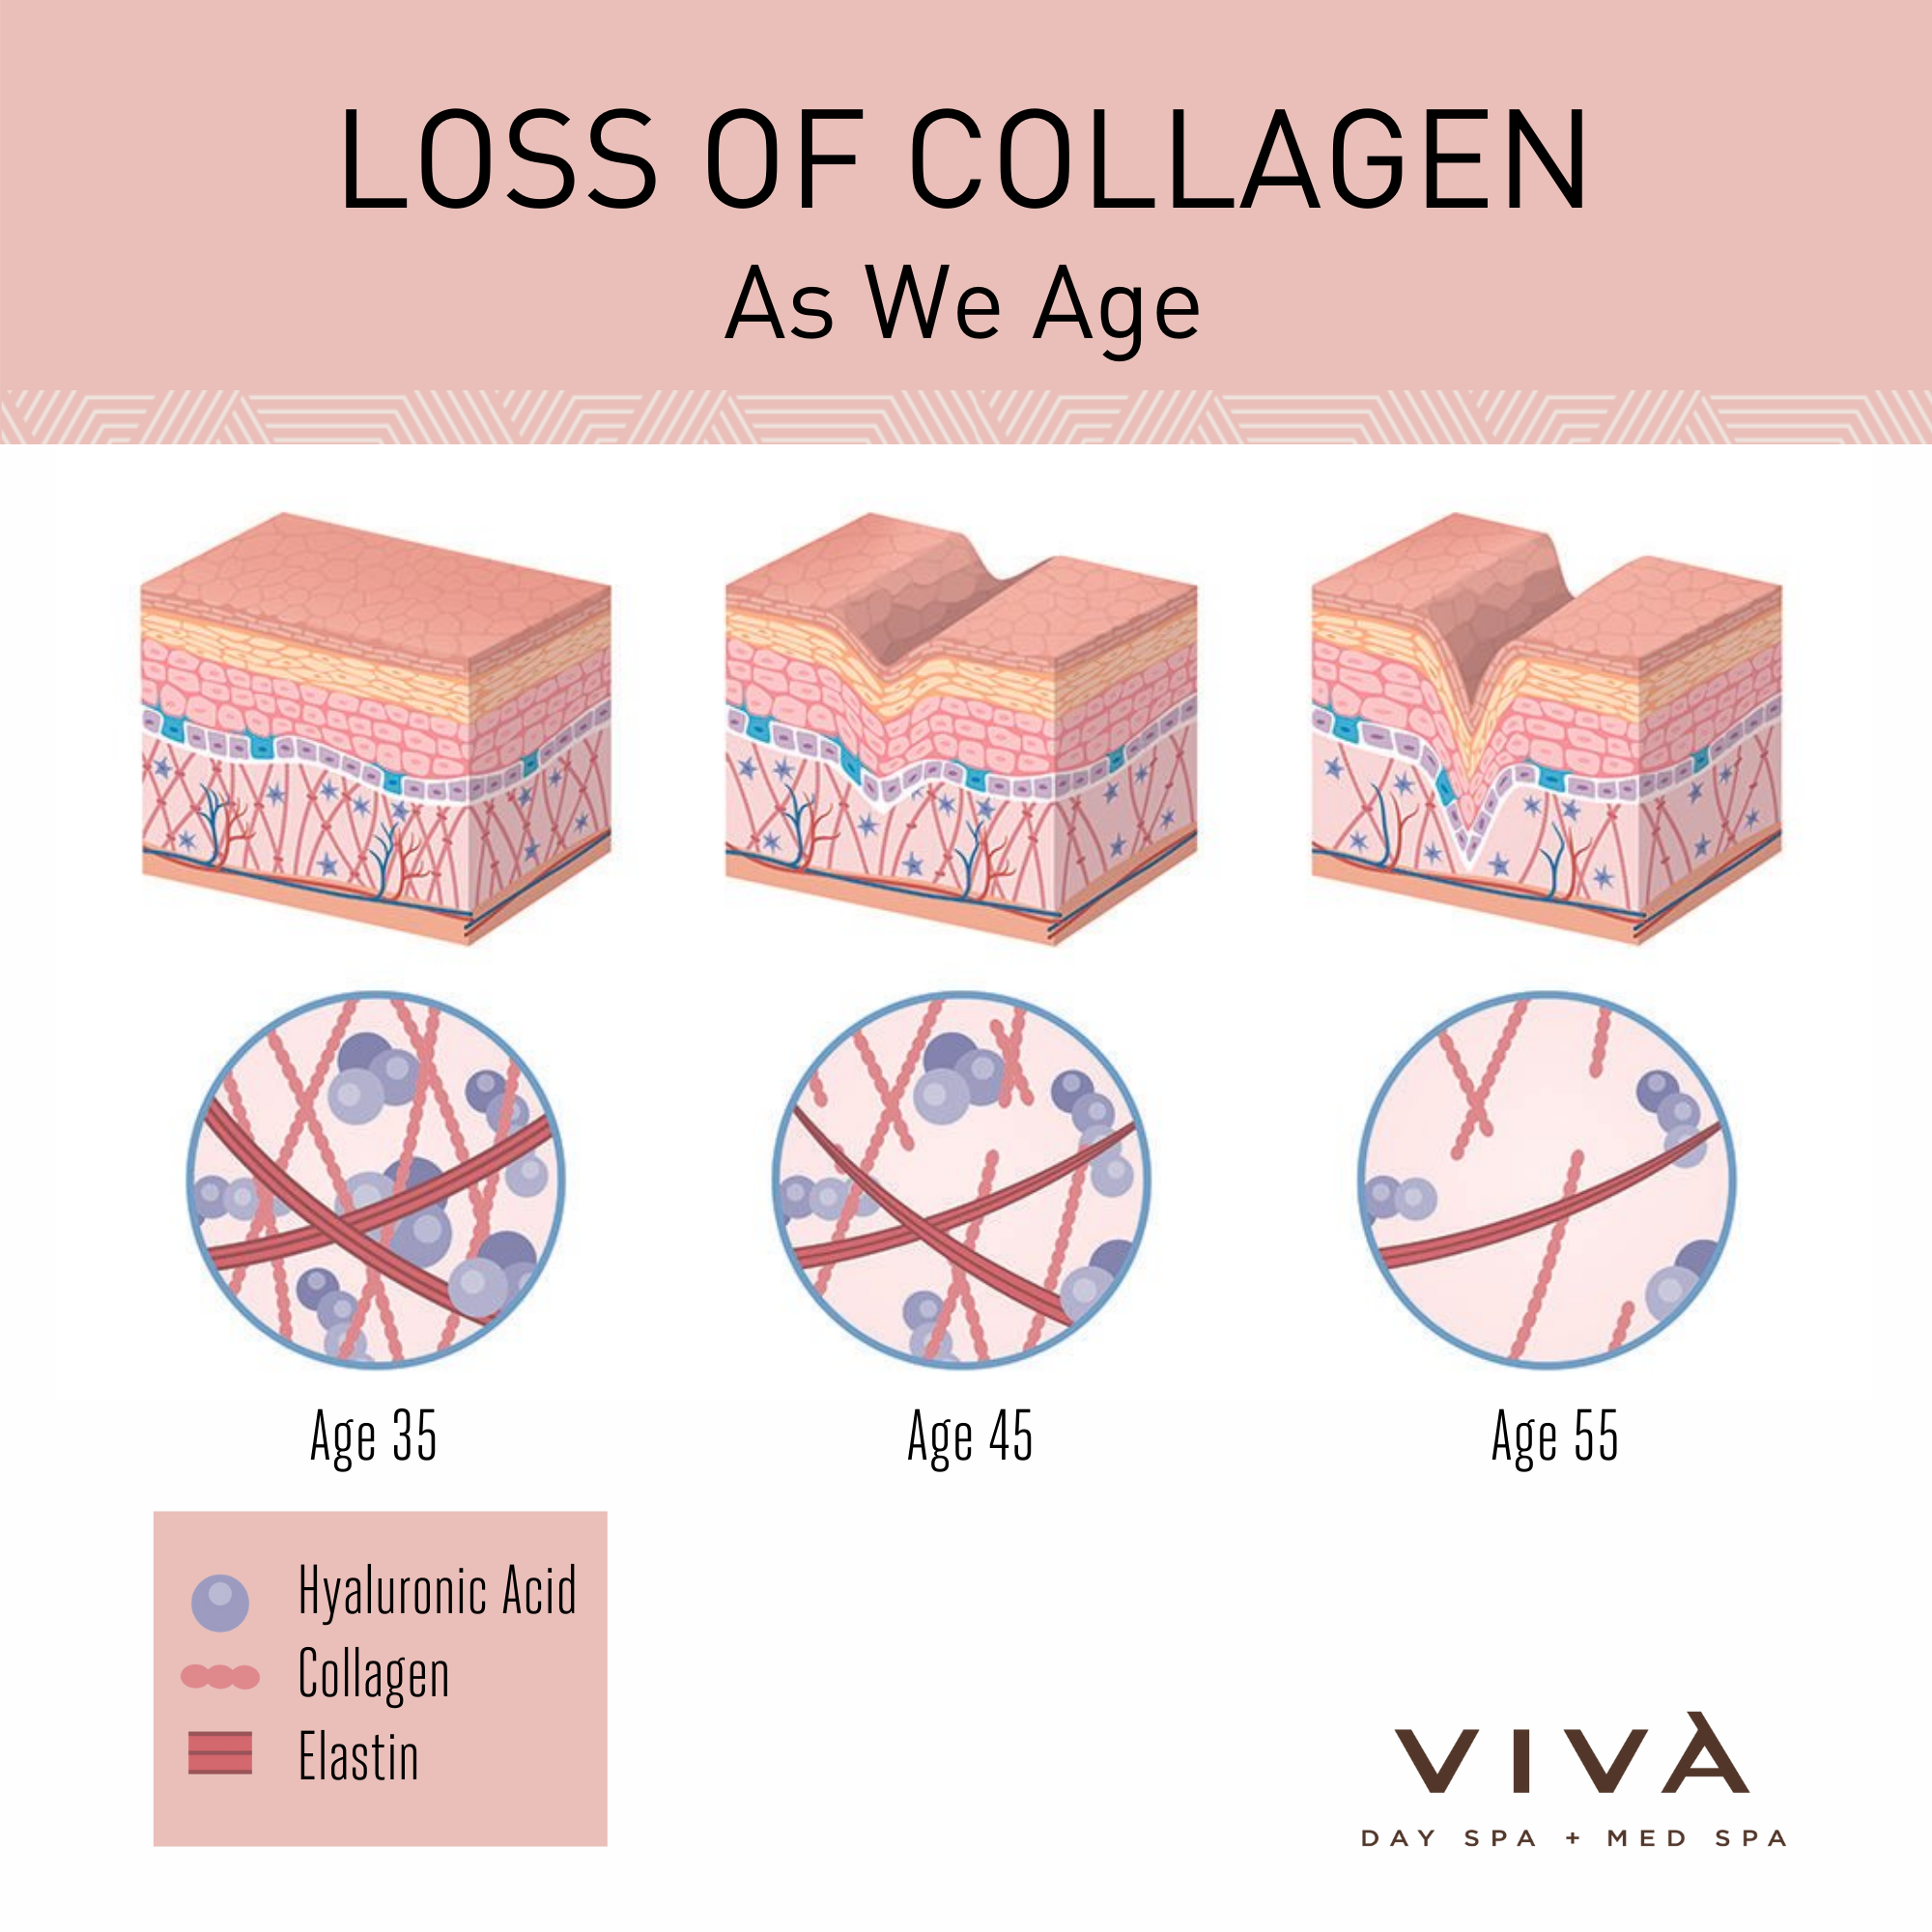 Illustration of collagen, elastin, and Hyaluronic Acid loss in our skin as we age over time.